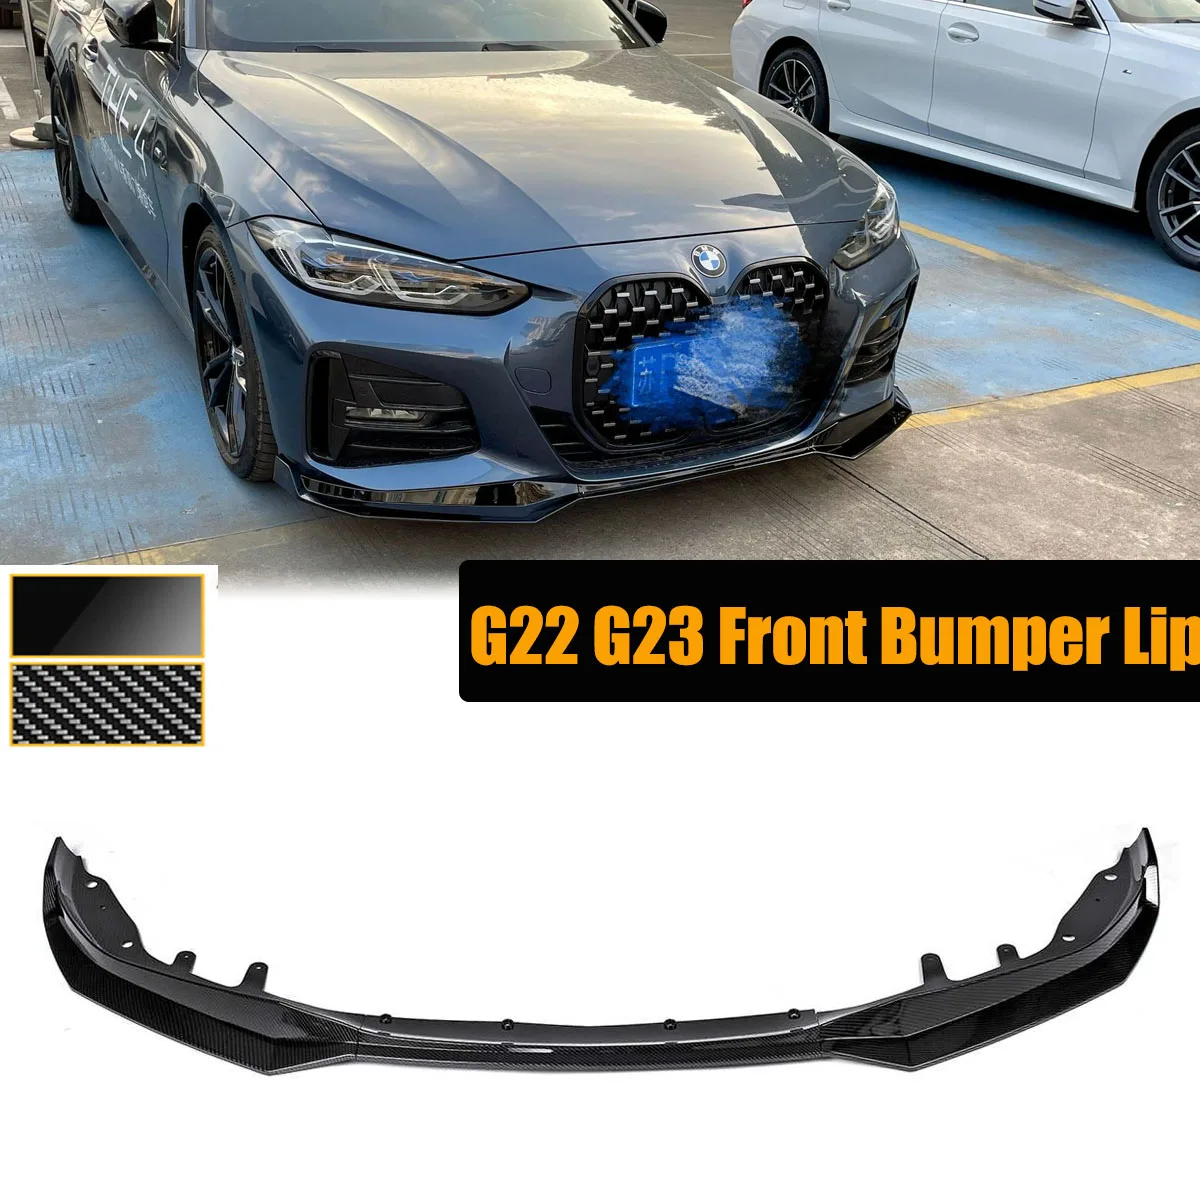 Black Front Bumper Lip Body Kit Spoiler Side Splitter Protect Cover Guard For BMW G22 G23 4 Series 2020 2021 Car Accessories